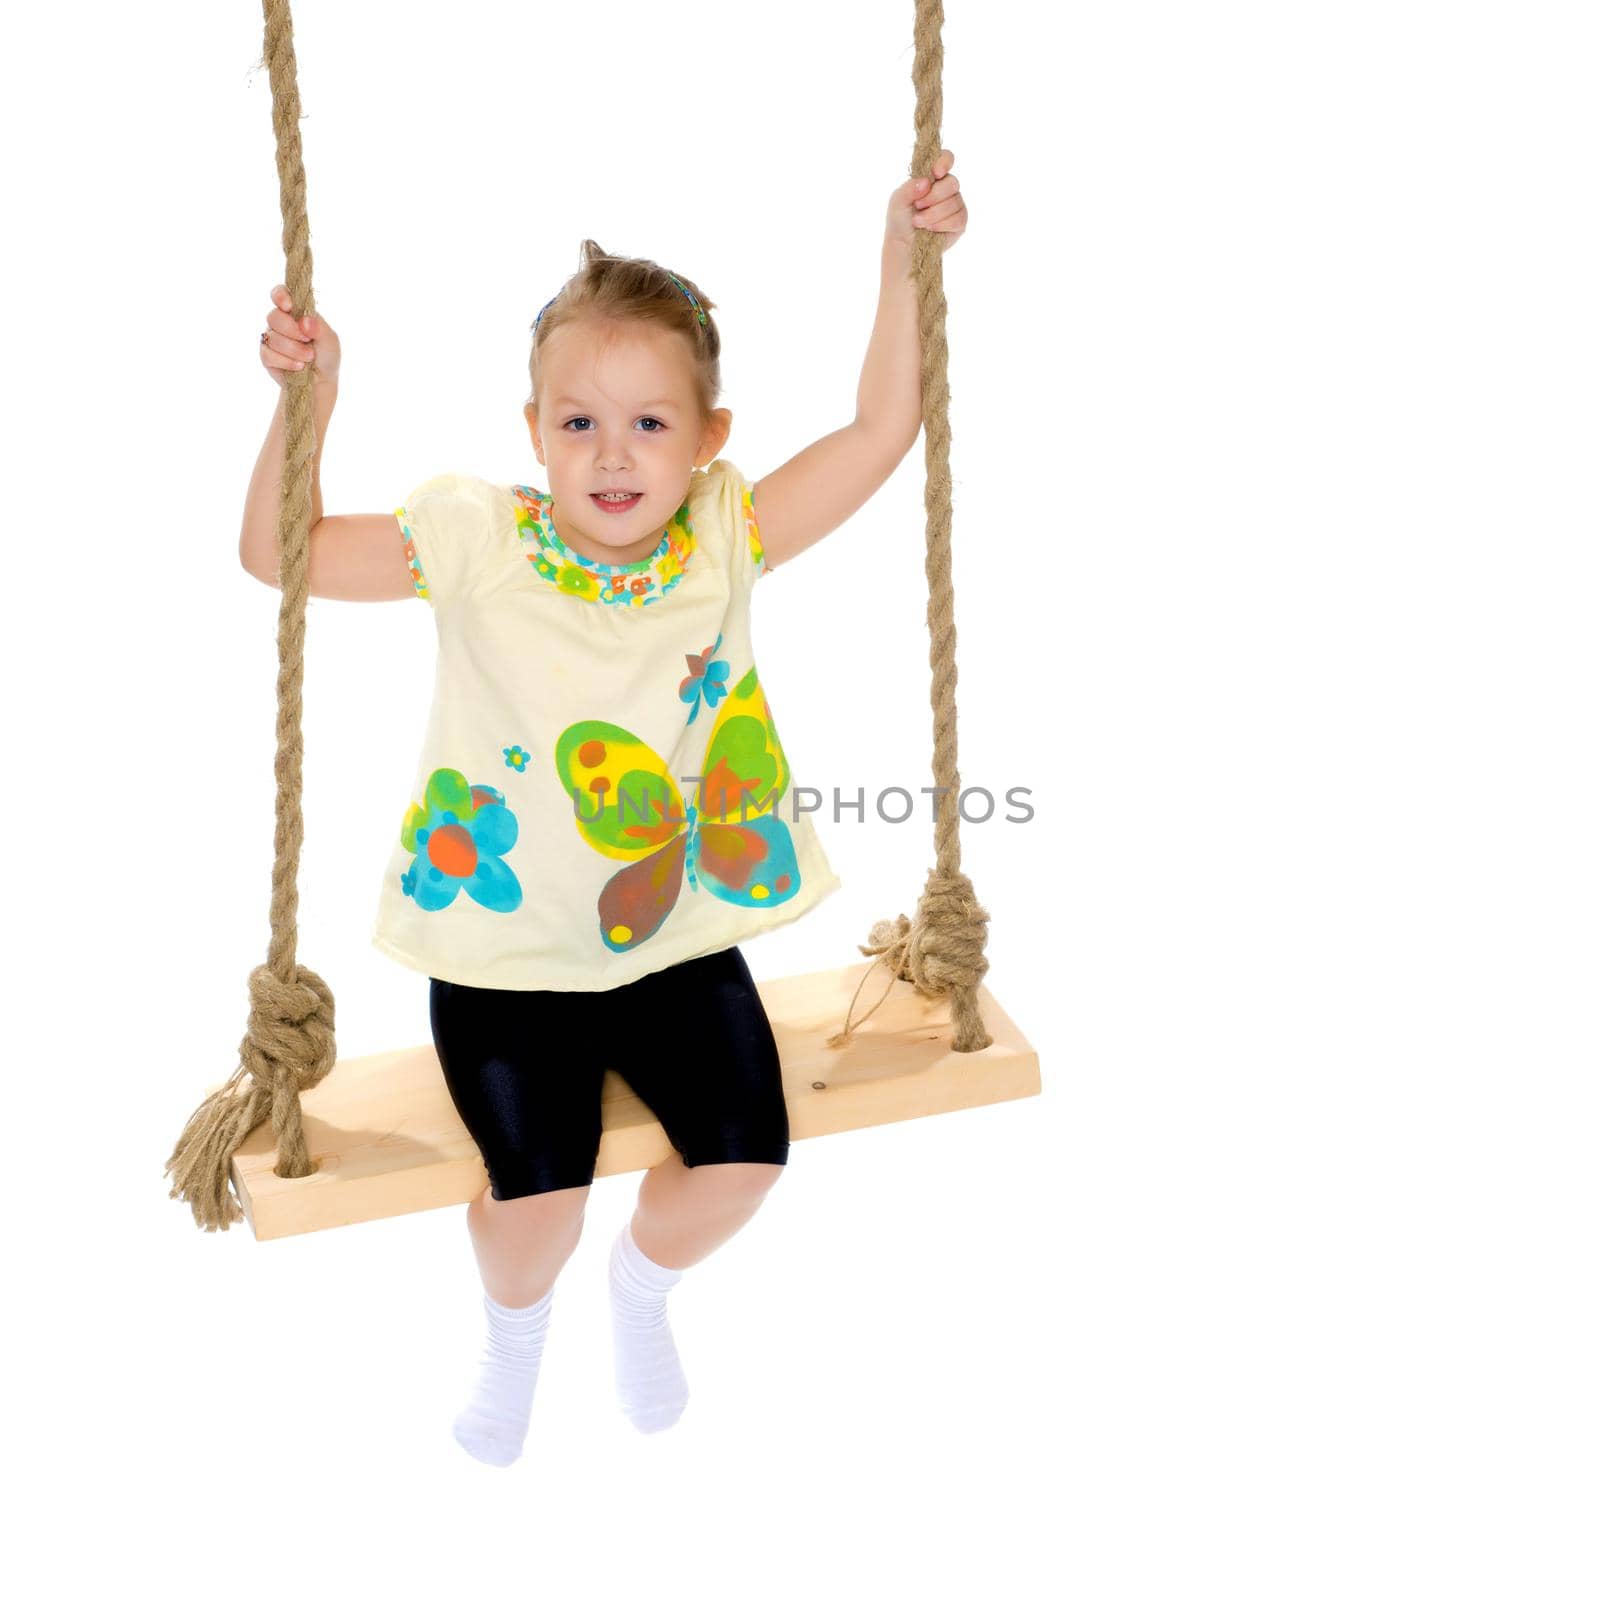 Beautiful little girl swinging on swing. The concept of family happiness, child development, sports education and summer recreation. Isolated on white background.